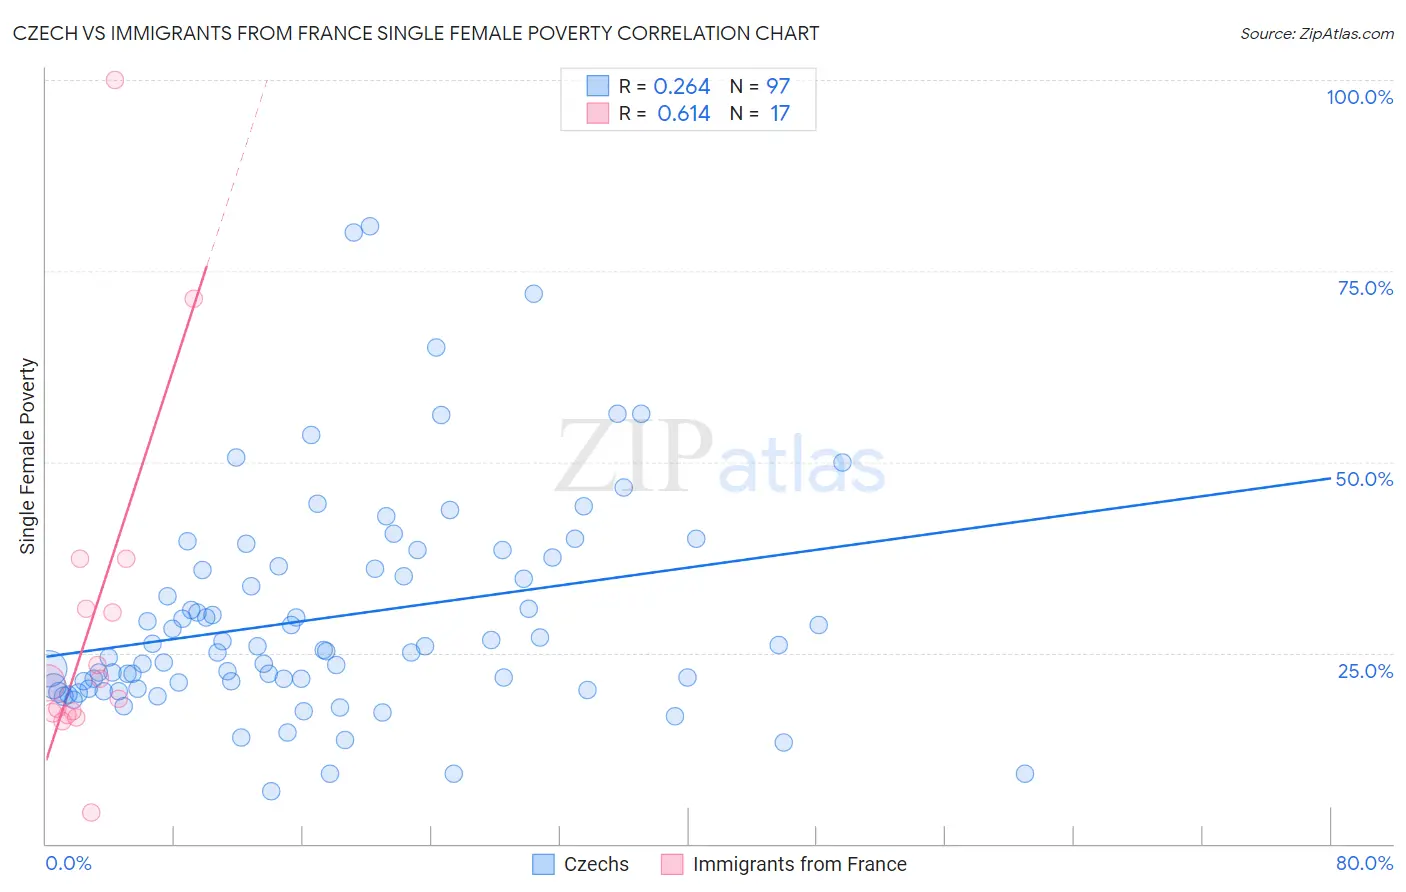 Czech vs Immigrants from France Single Female Poverty